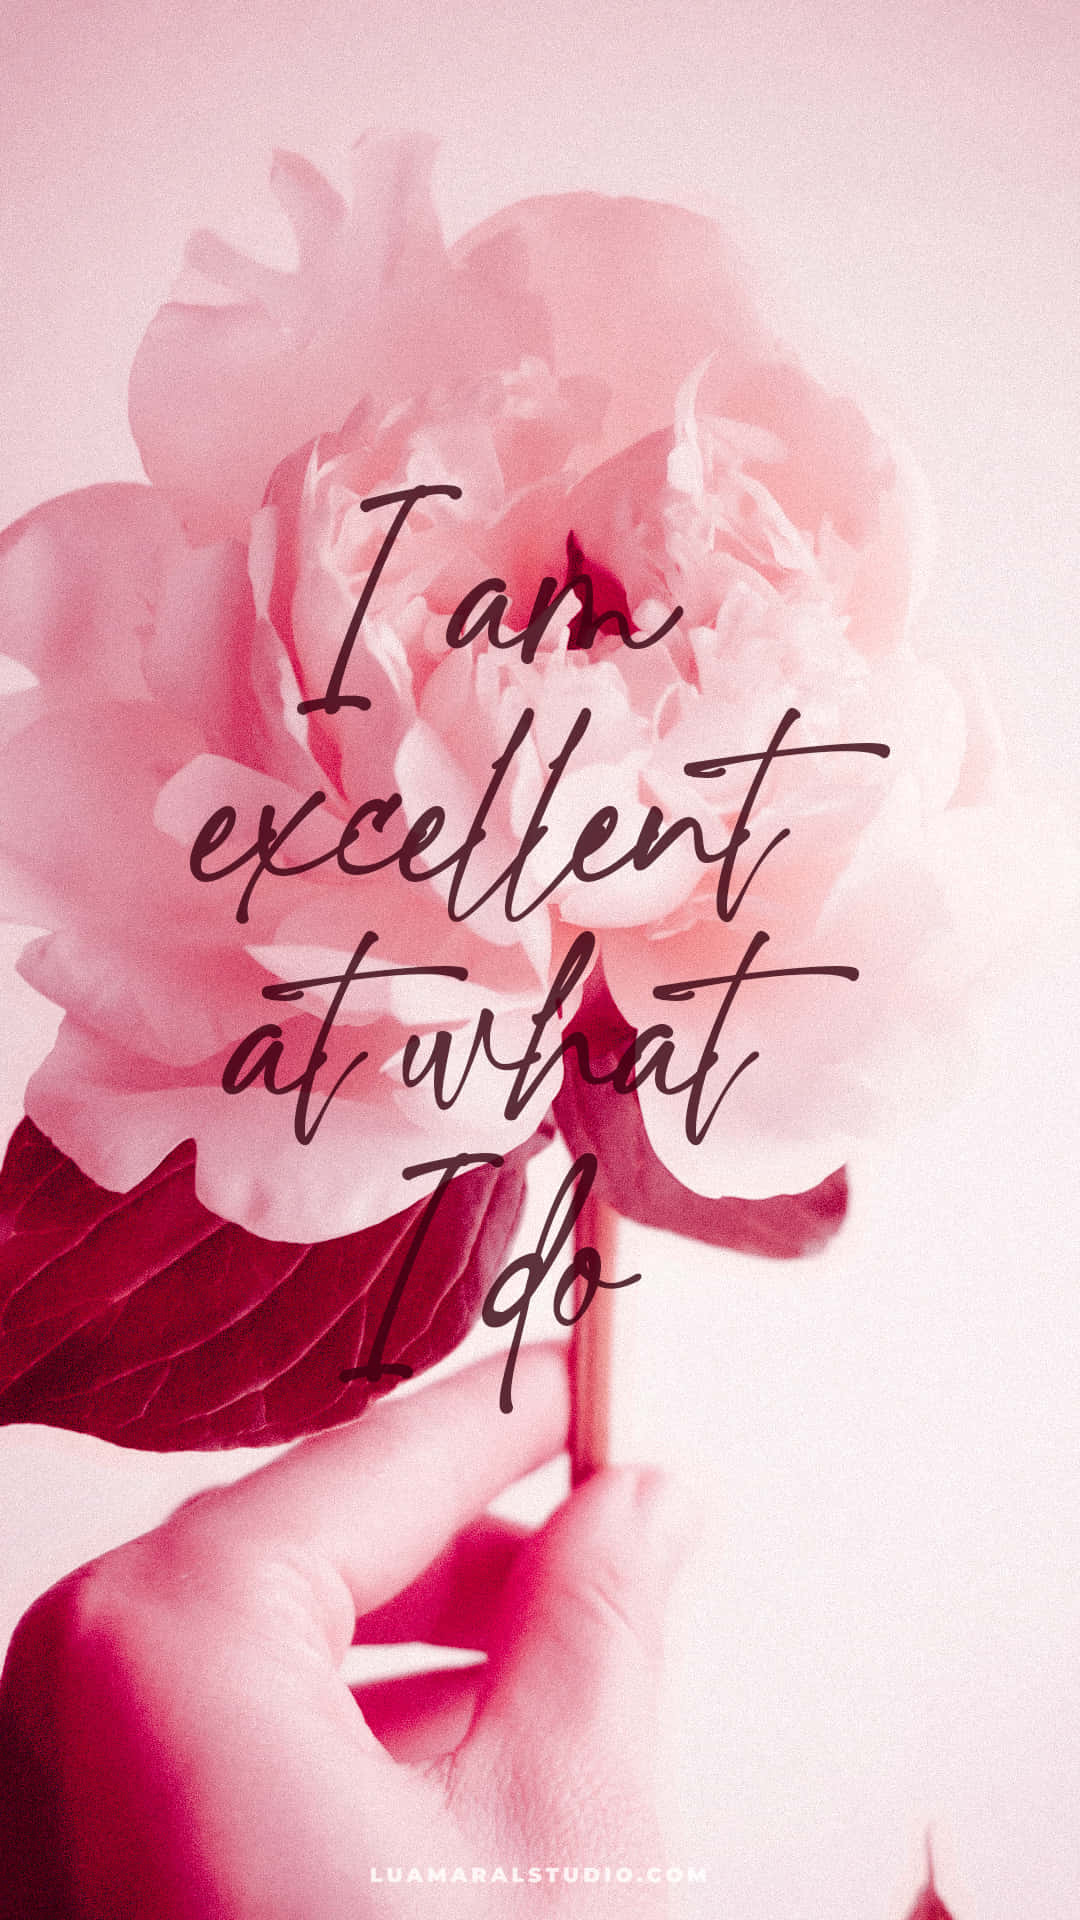 I Am Excellent At What I Do Wallpaper